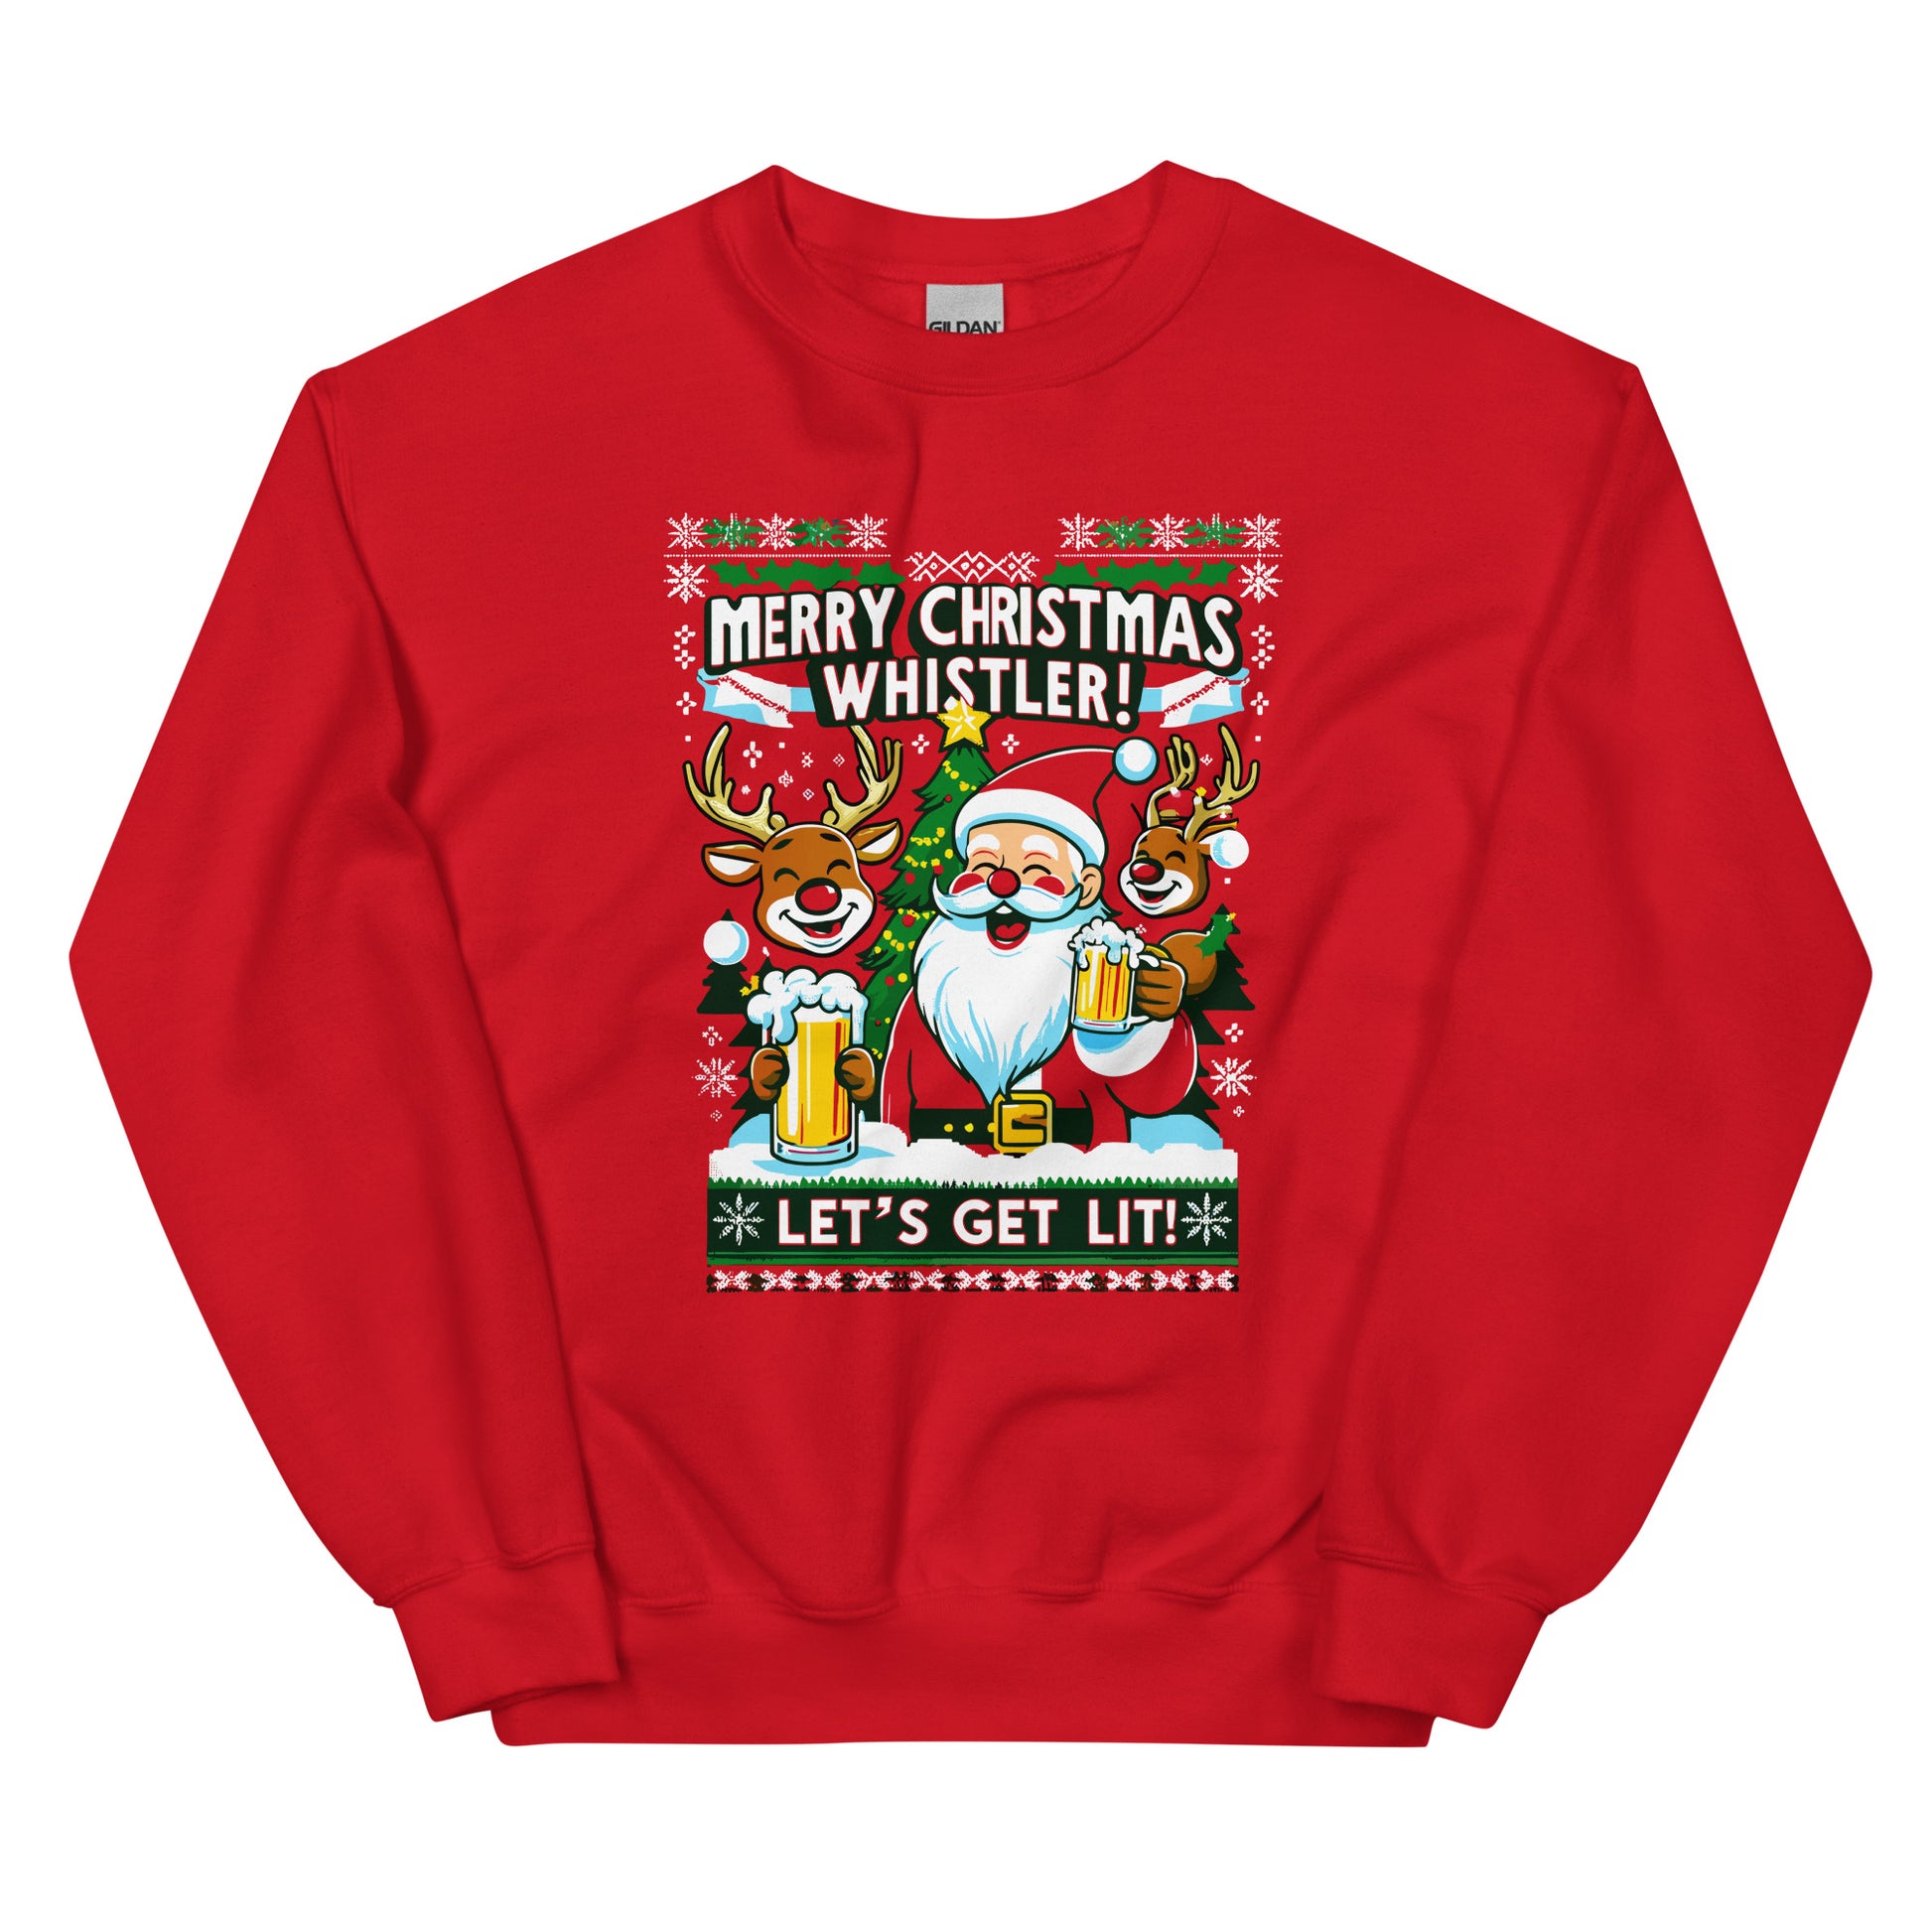 Merry Ciristmas Whistler lets get lit with santa printed ugly christmas sweater by whistler shirts